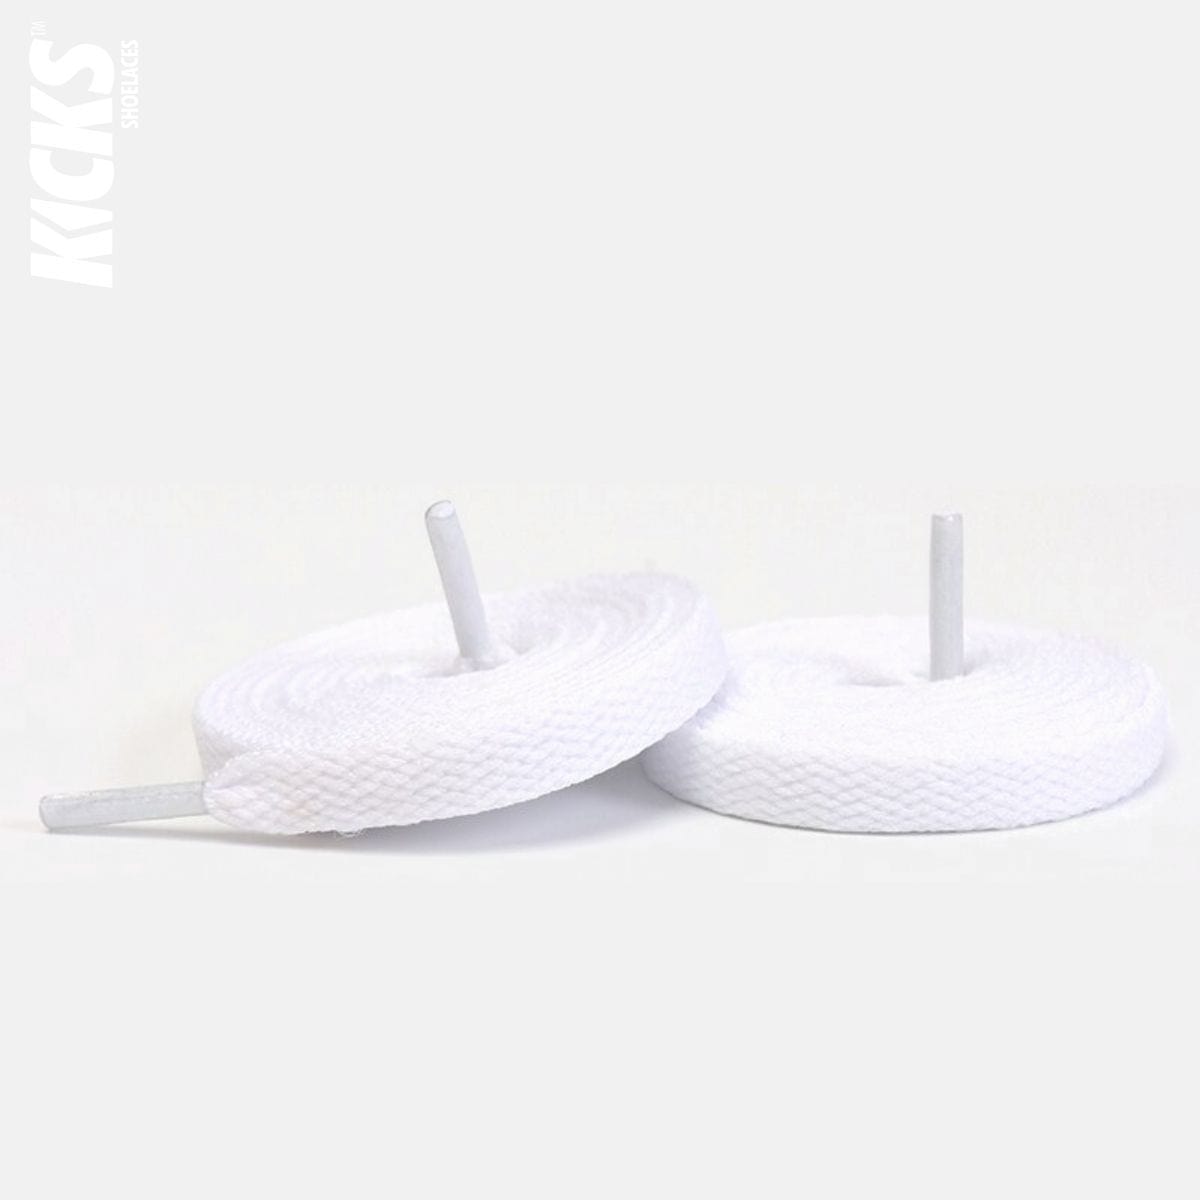 White Replacement Nike Shoe Laces for Air Force 1 Sneakers by Kicks Shoelaces